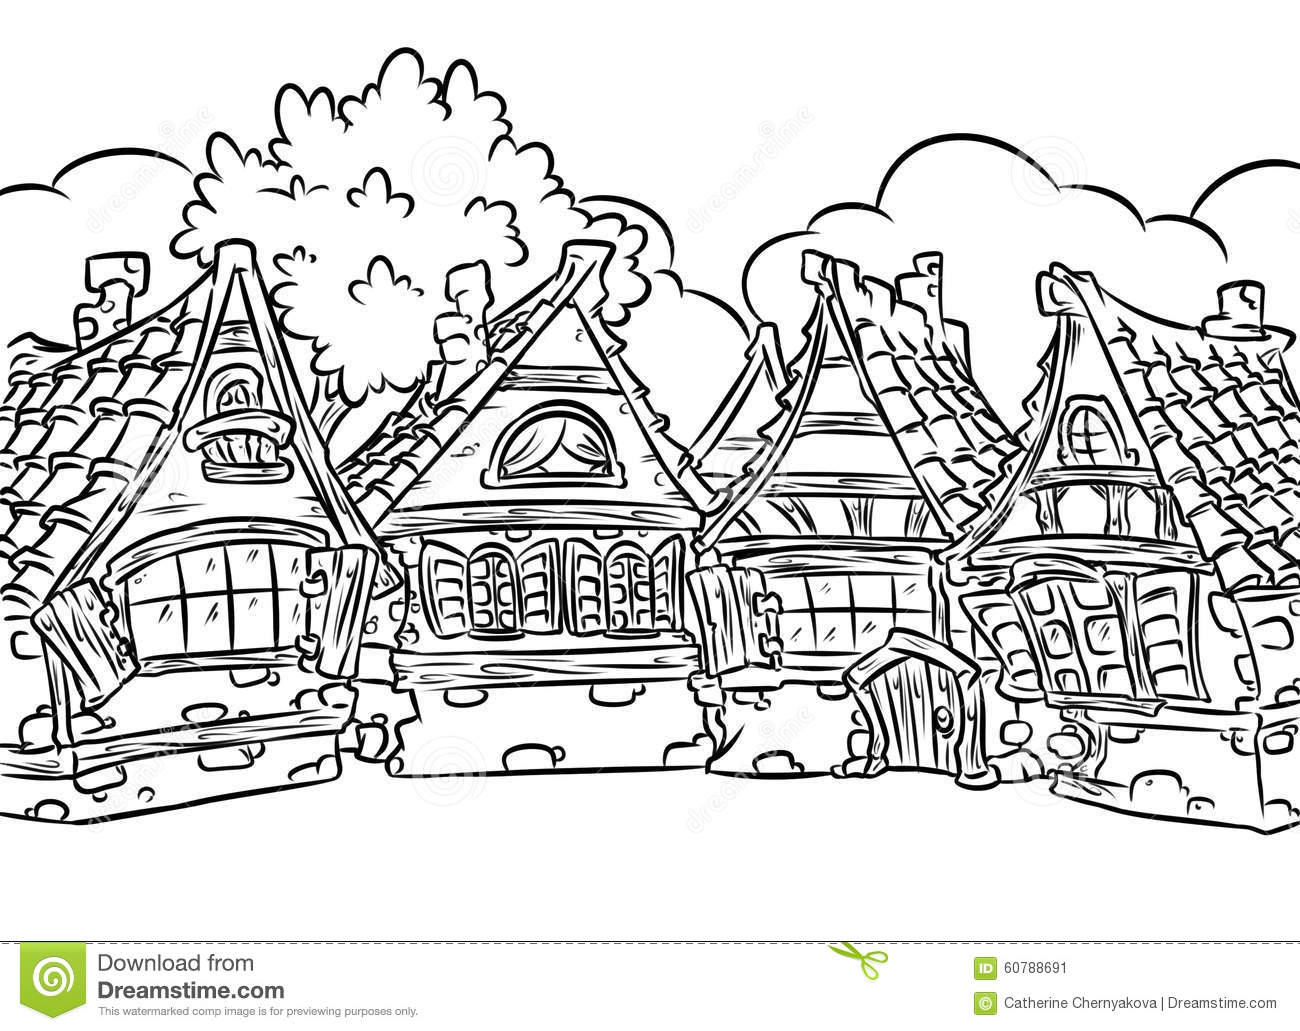 Village coloring, Download Village coloring for free 2019